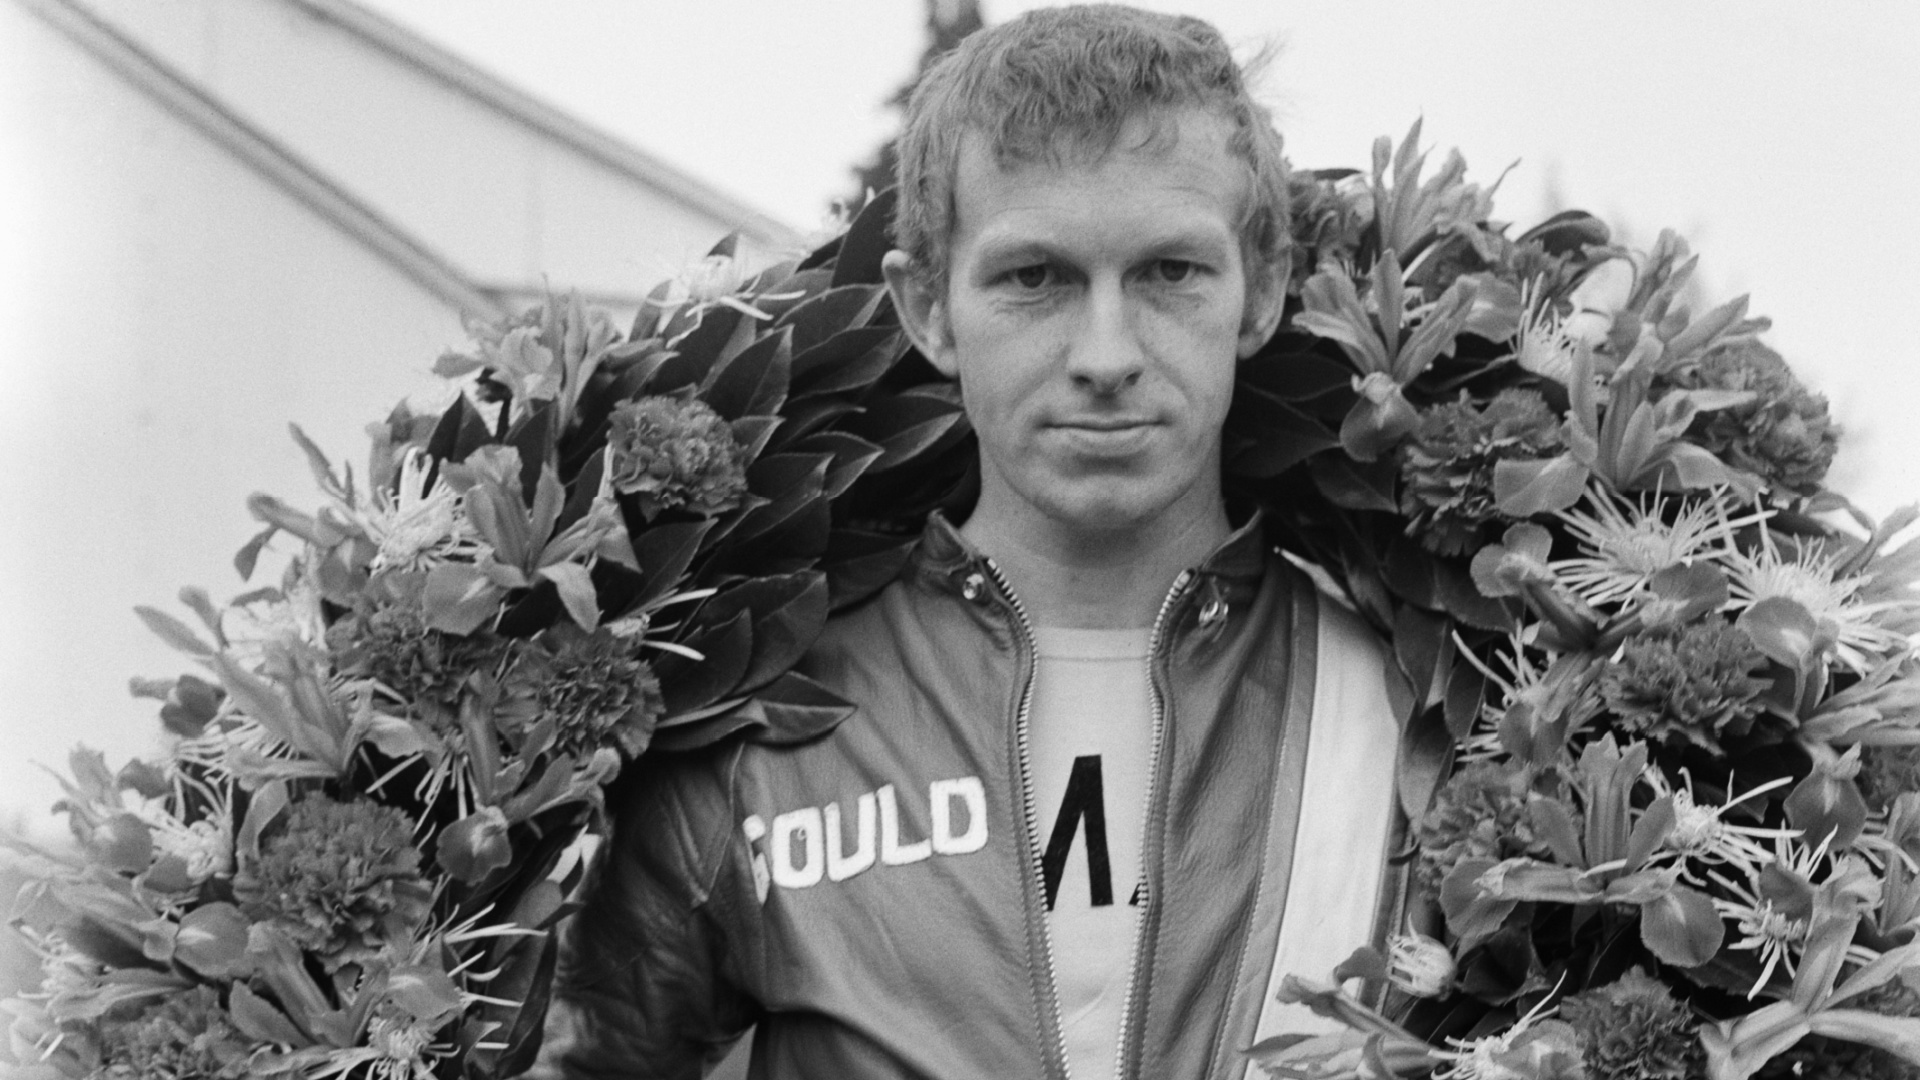 <p>British motorcycle racer Rodney Gould, 250cc world champion in 1970, died at his home in Cheltenham, UK at age 81.</p>